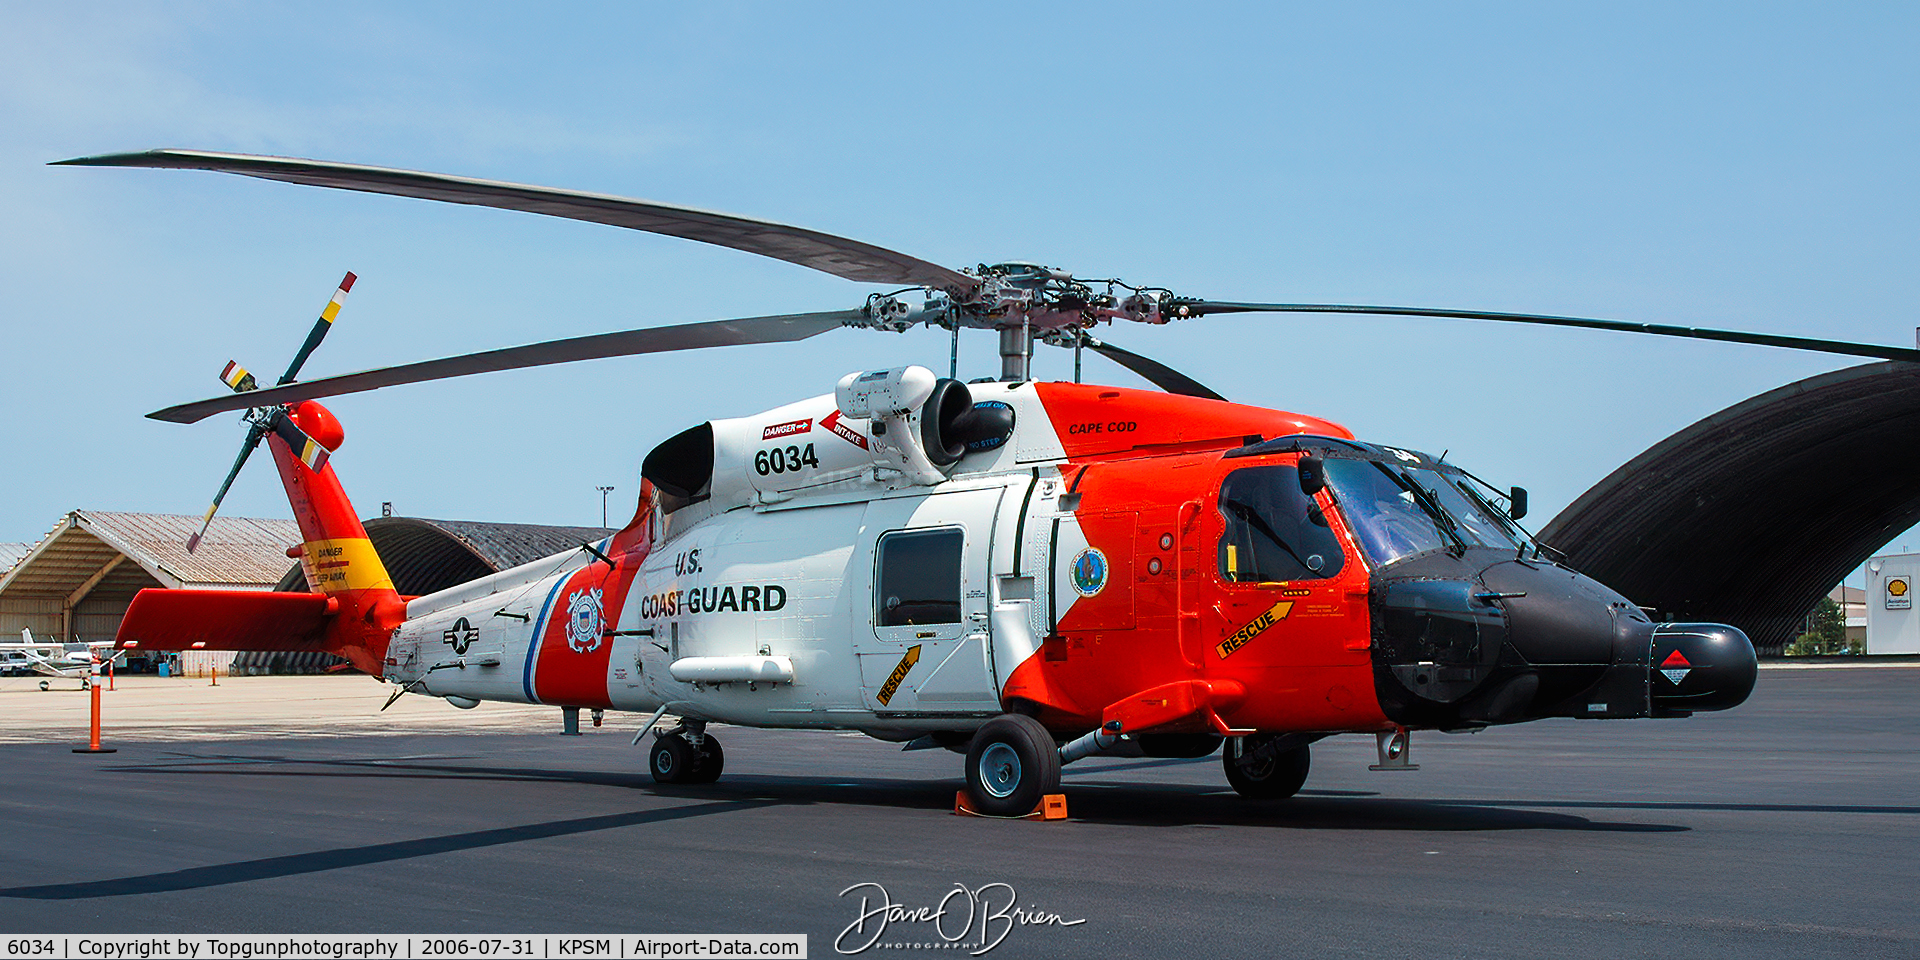 6034, Sikorsky HH-60J Jayhawk C/N 70.1955, out of USCG Air Station Cape Cod